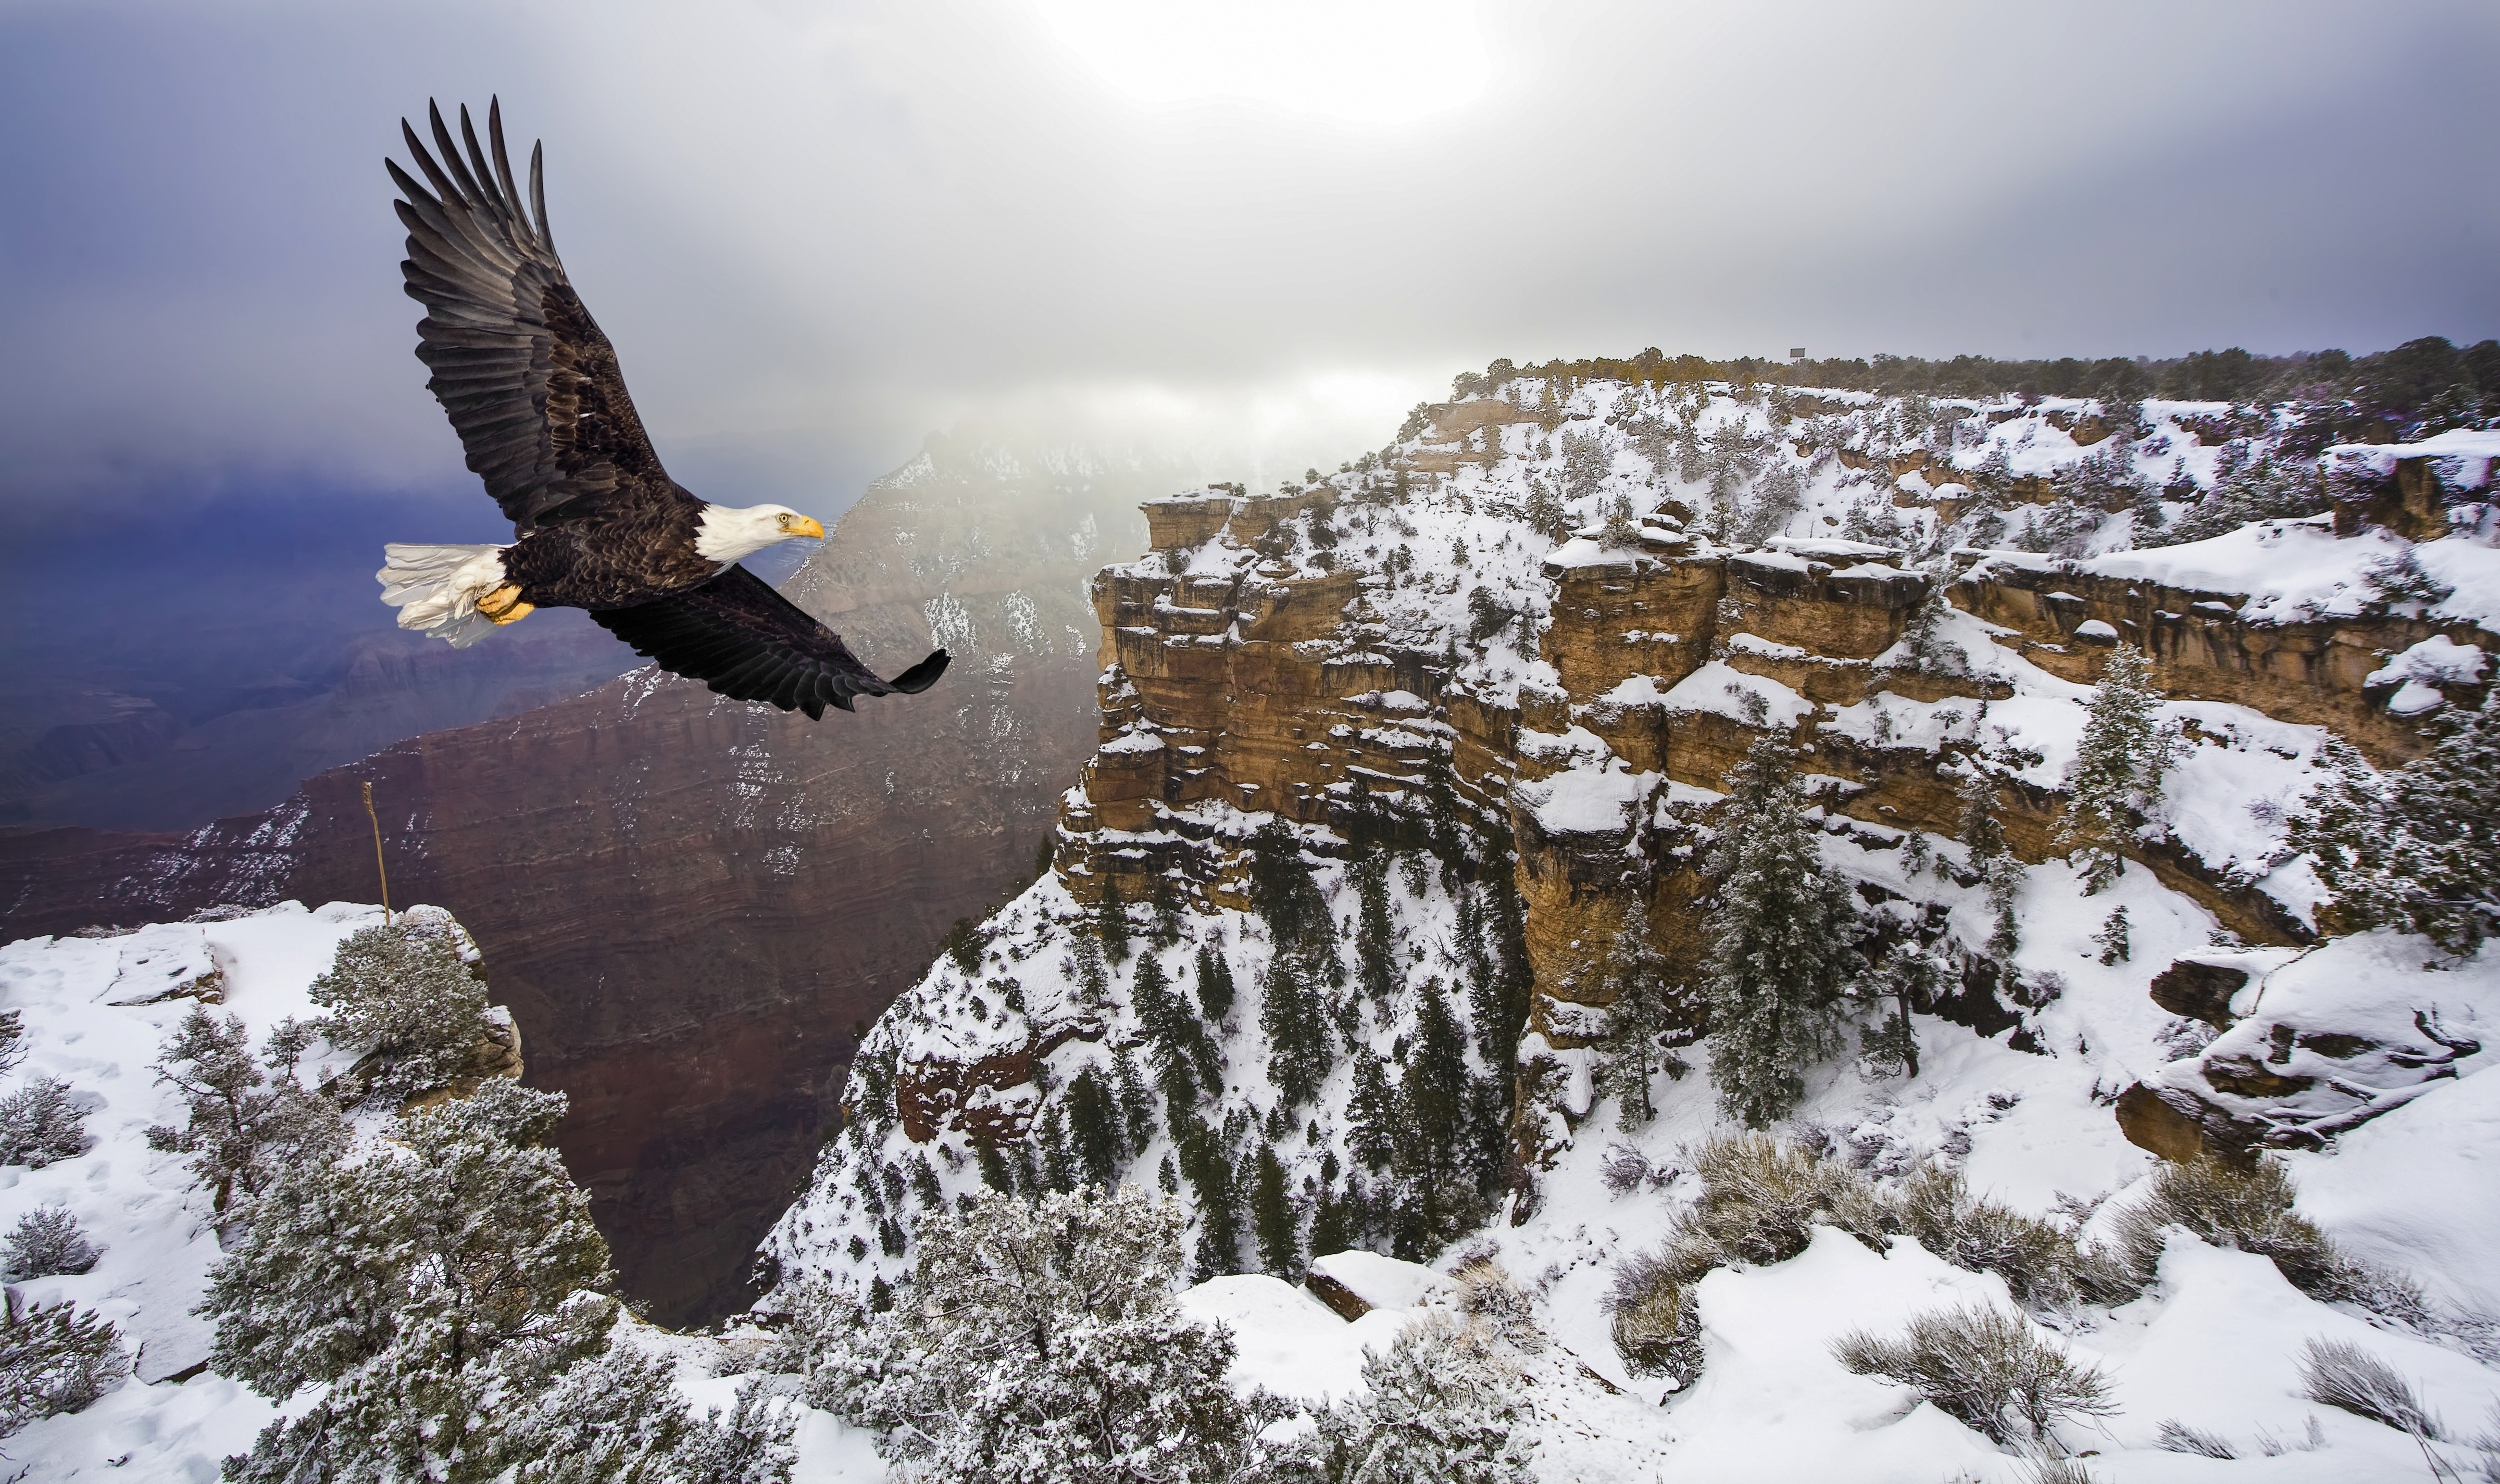 Image: Bald eagle, eagle, flying, wings, mountains, winter, snow, height, bird, predator